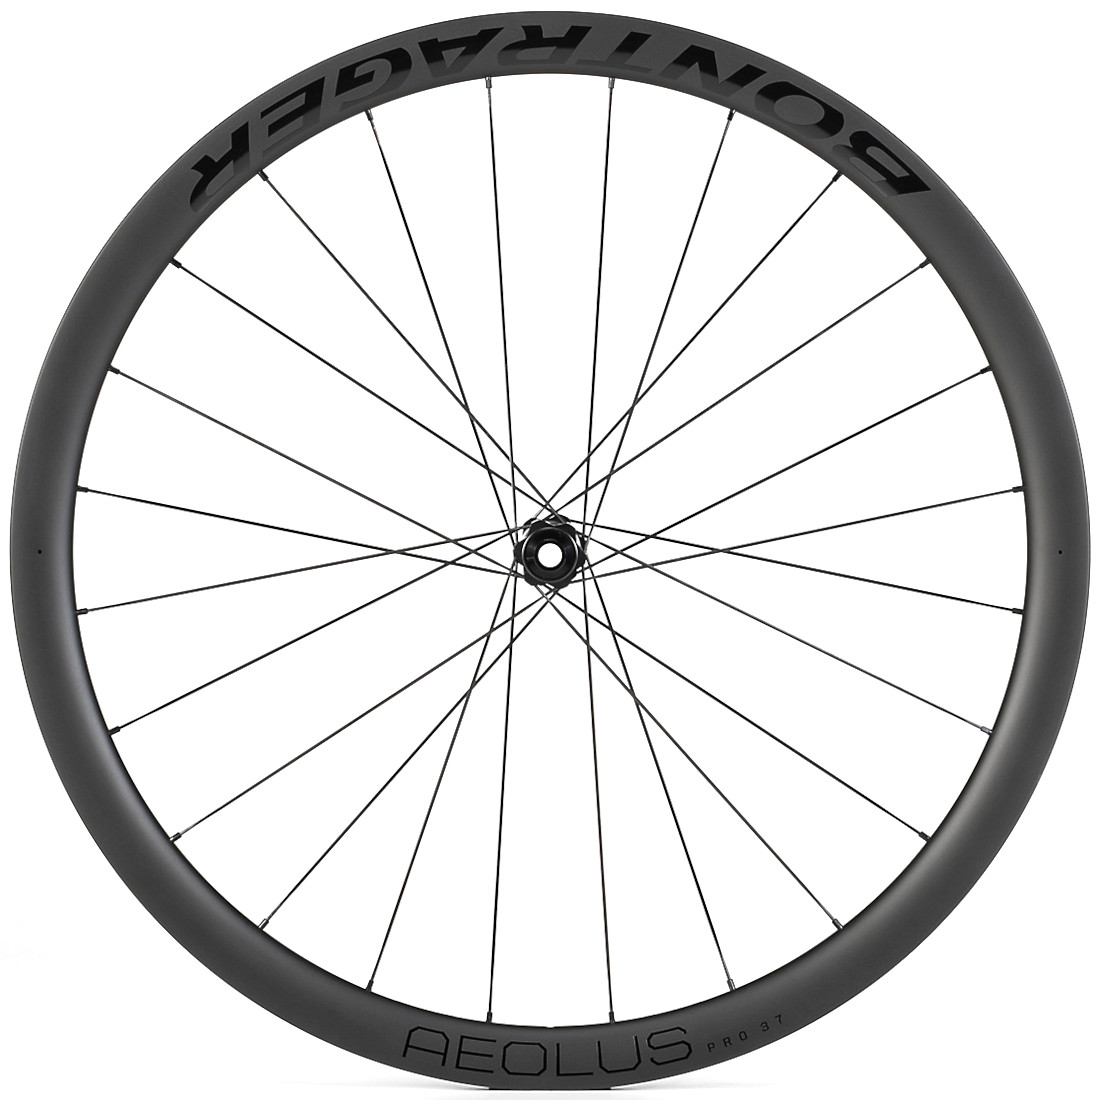 Picture of Bontrager Aeolus Pro 37 TLR Road Front Wheel - Clincher - Centerlock - 12x100mm